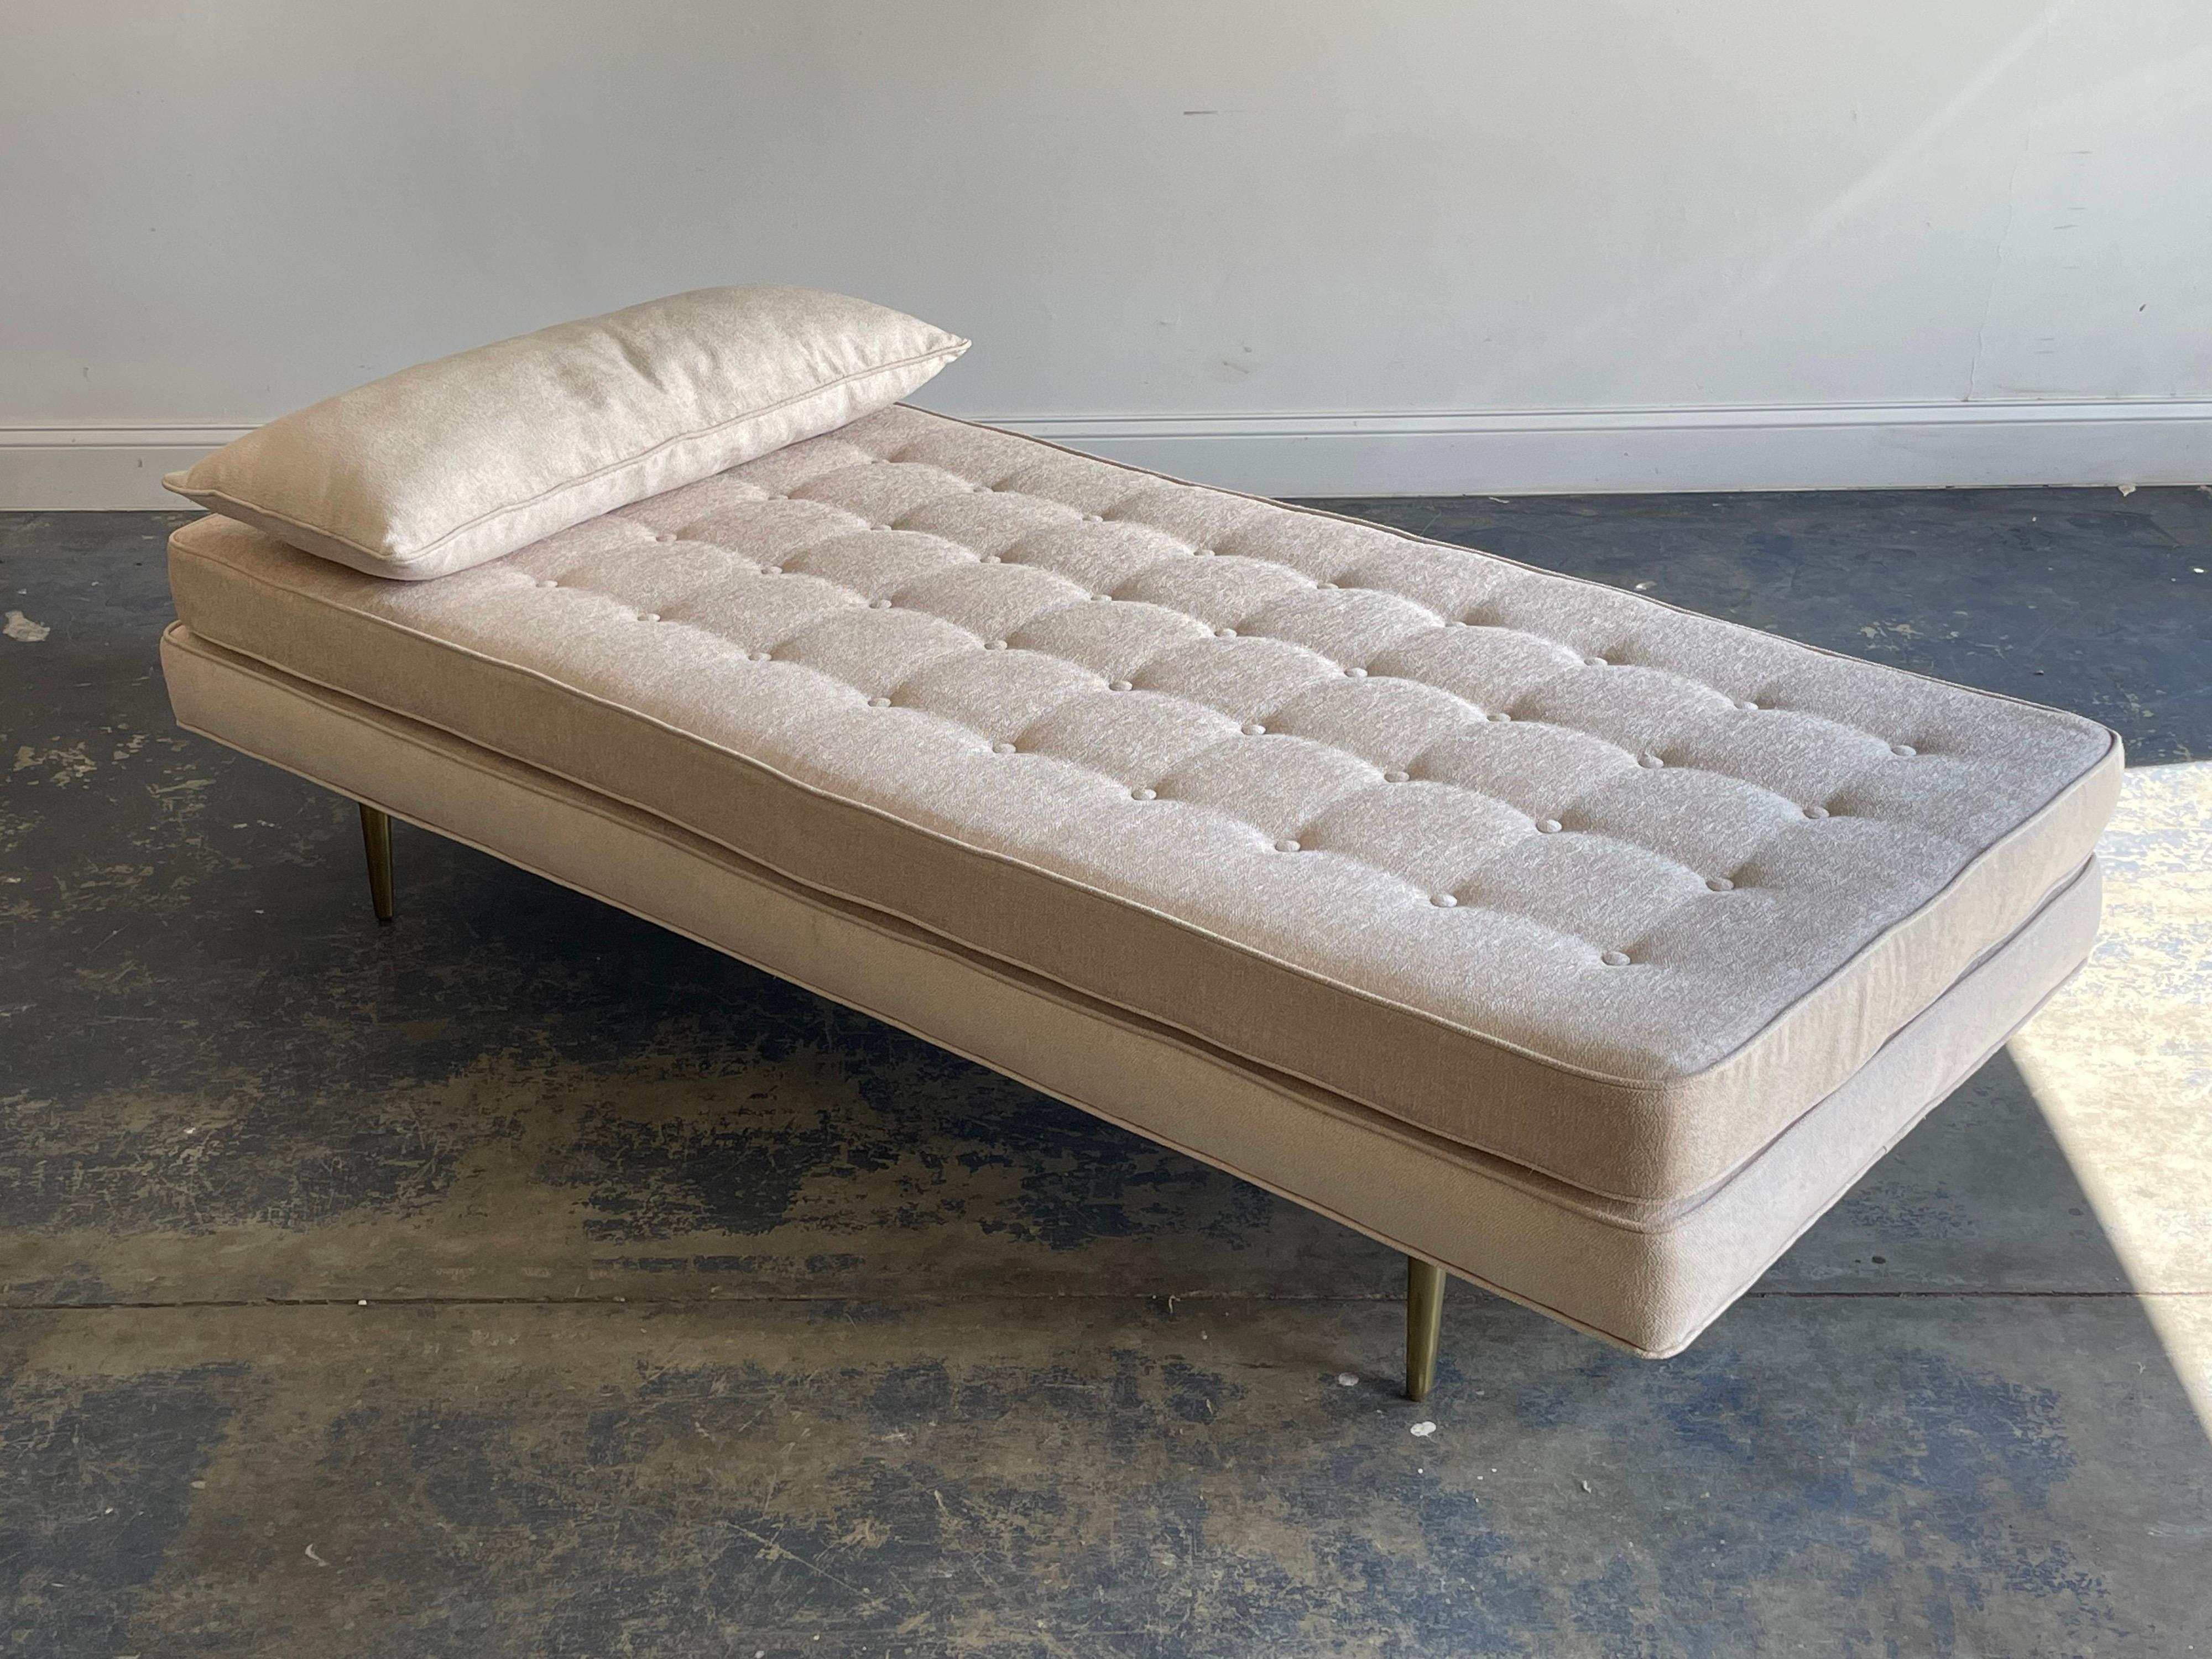 A large daybed or chaise designed by Edward Wormley for Dunbar. Loose tufted cushion with a custom accent pillow. Supported by four solid brass legs.

Would work well in a variety of interiors such as modern, mid century modern, contemporary, etc.